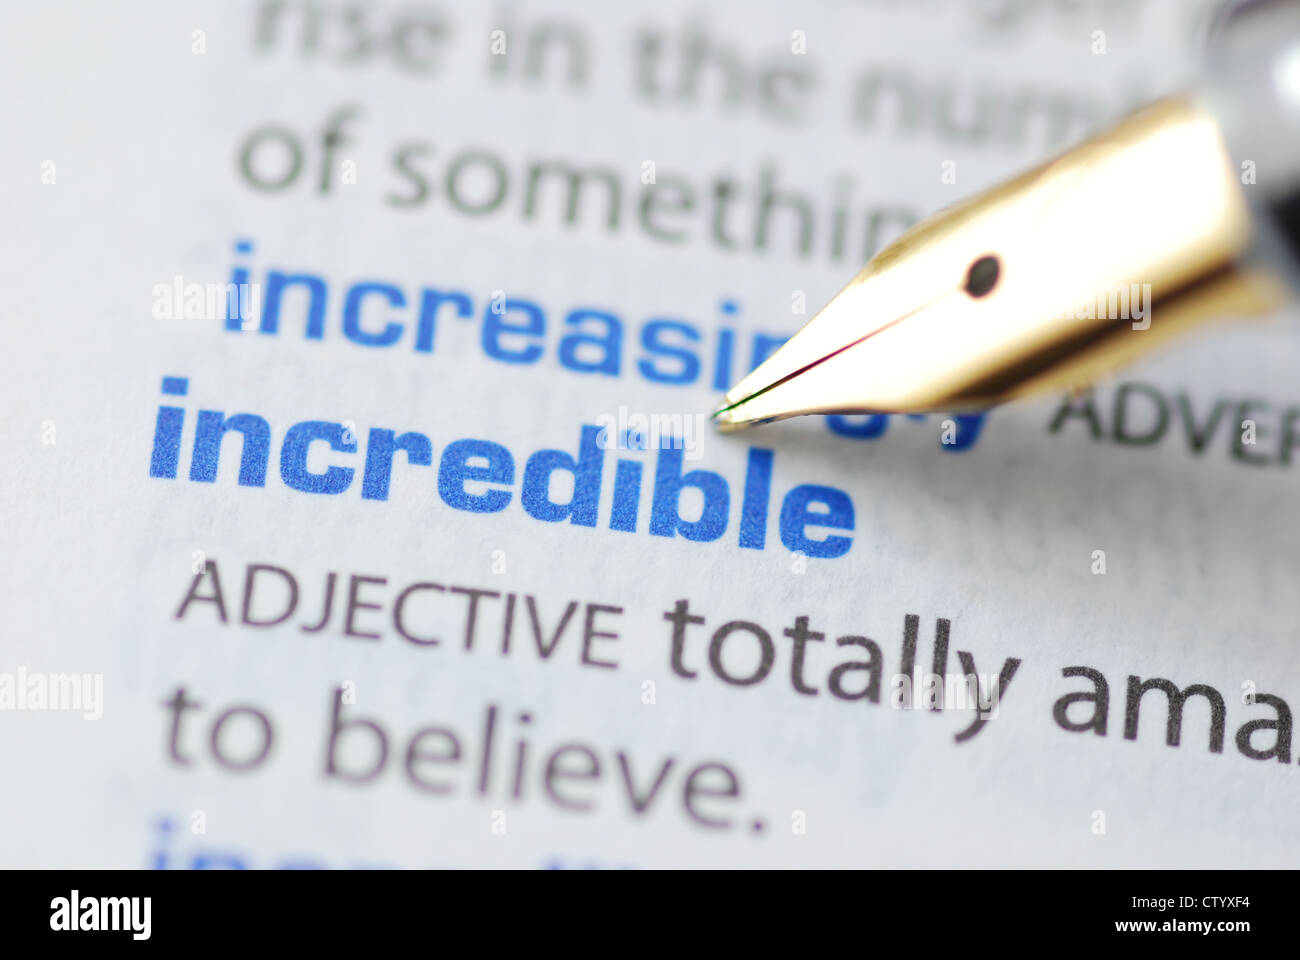 Incredible - Dictionary Series Stock Photo